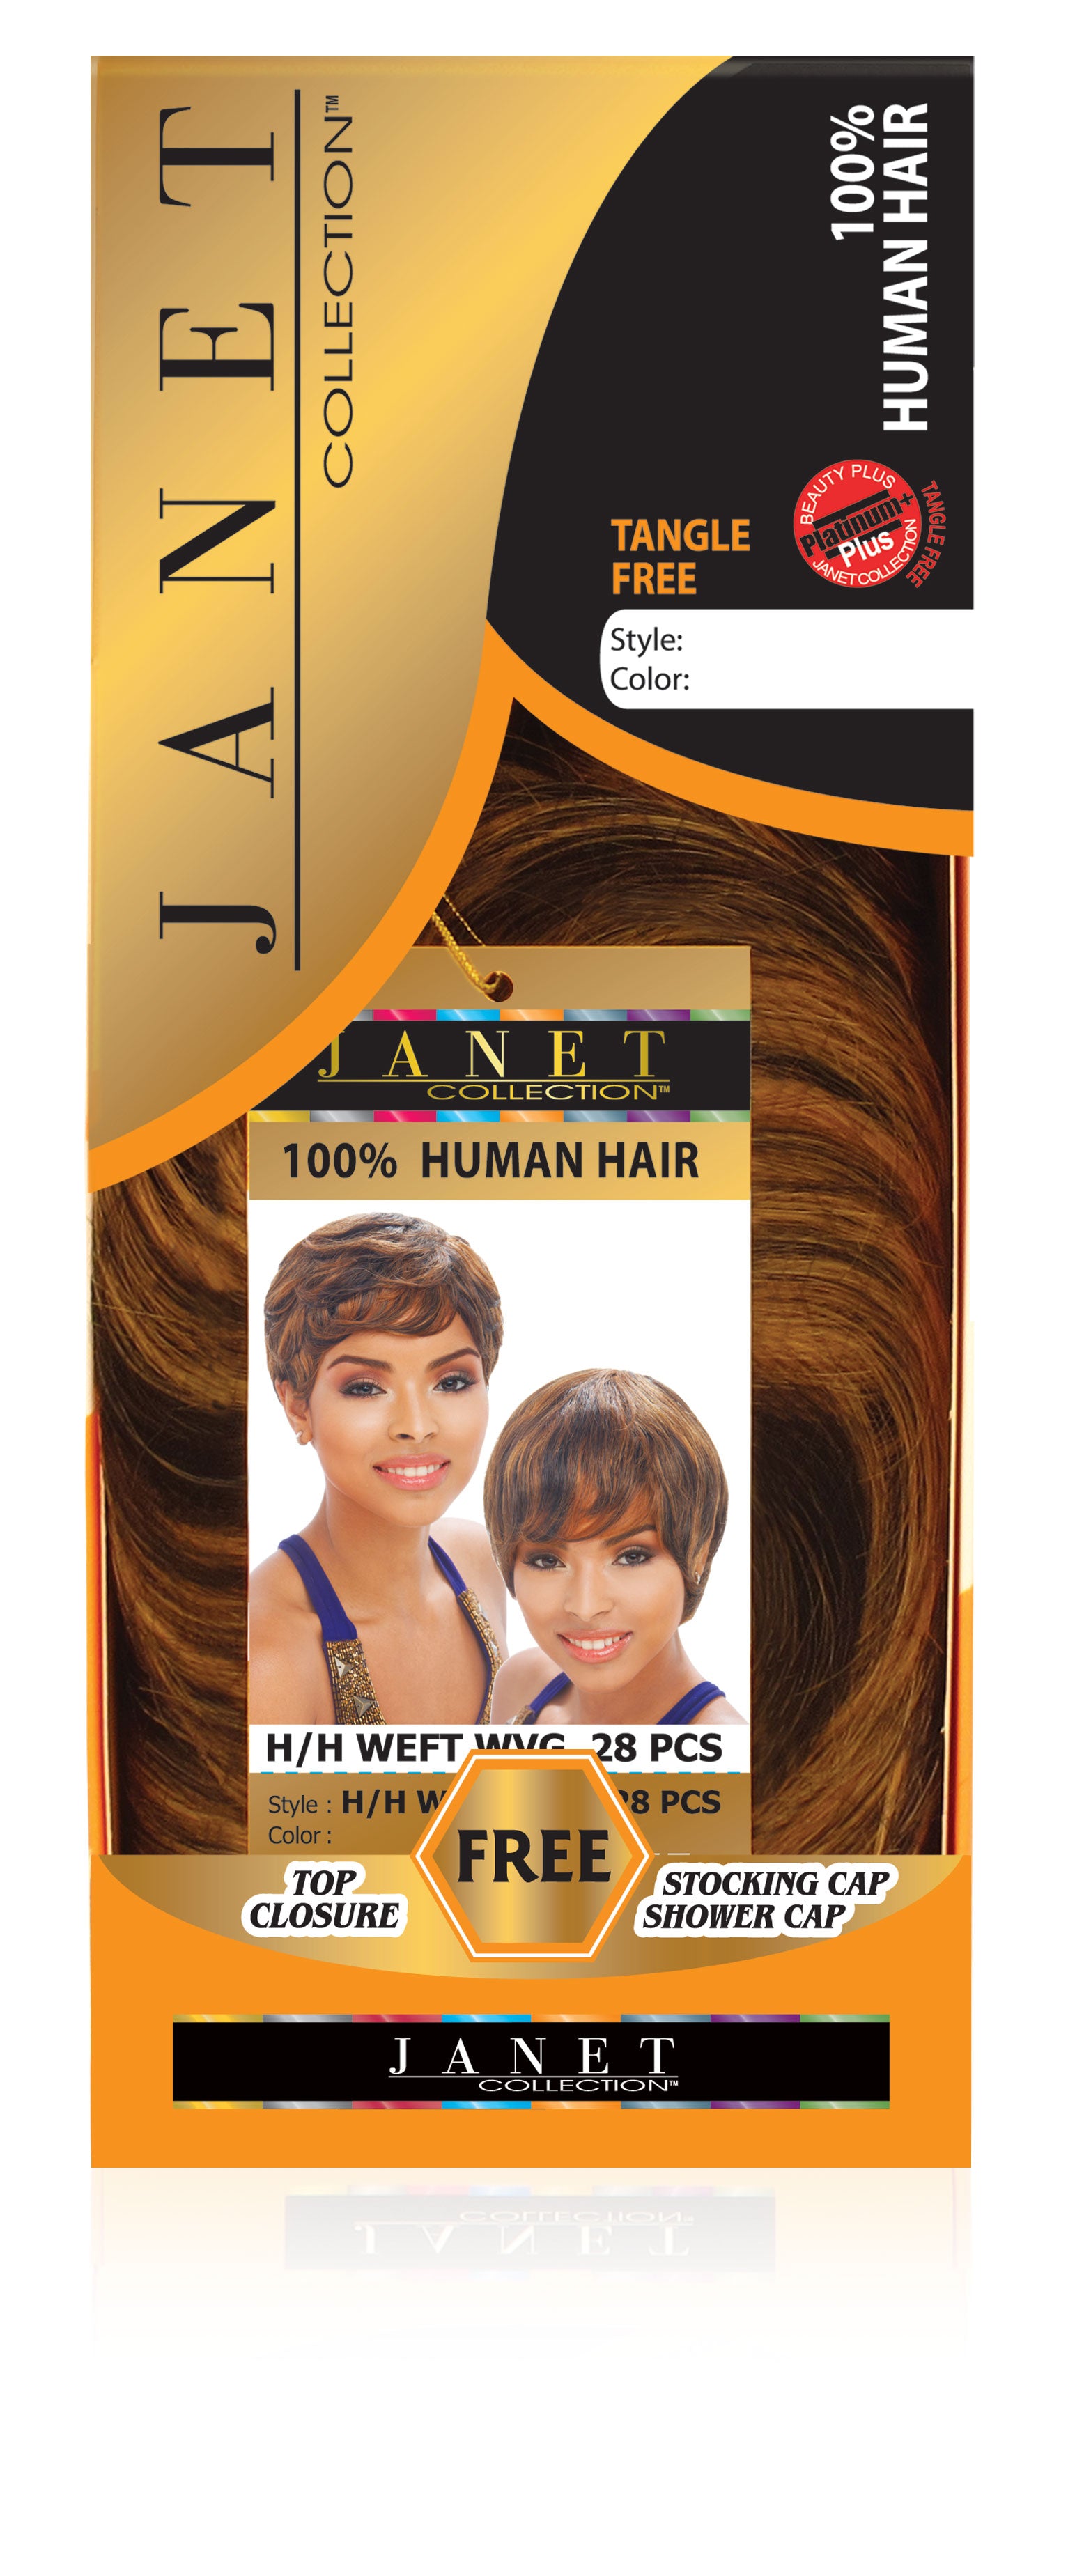 JANET COLLECTIONS - H/H WEFT 28PCS